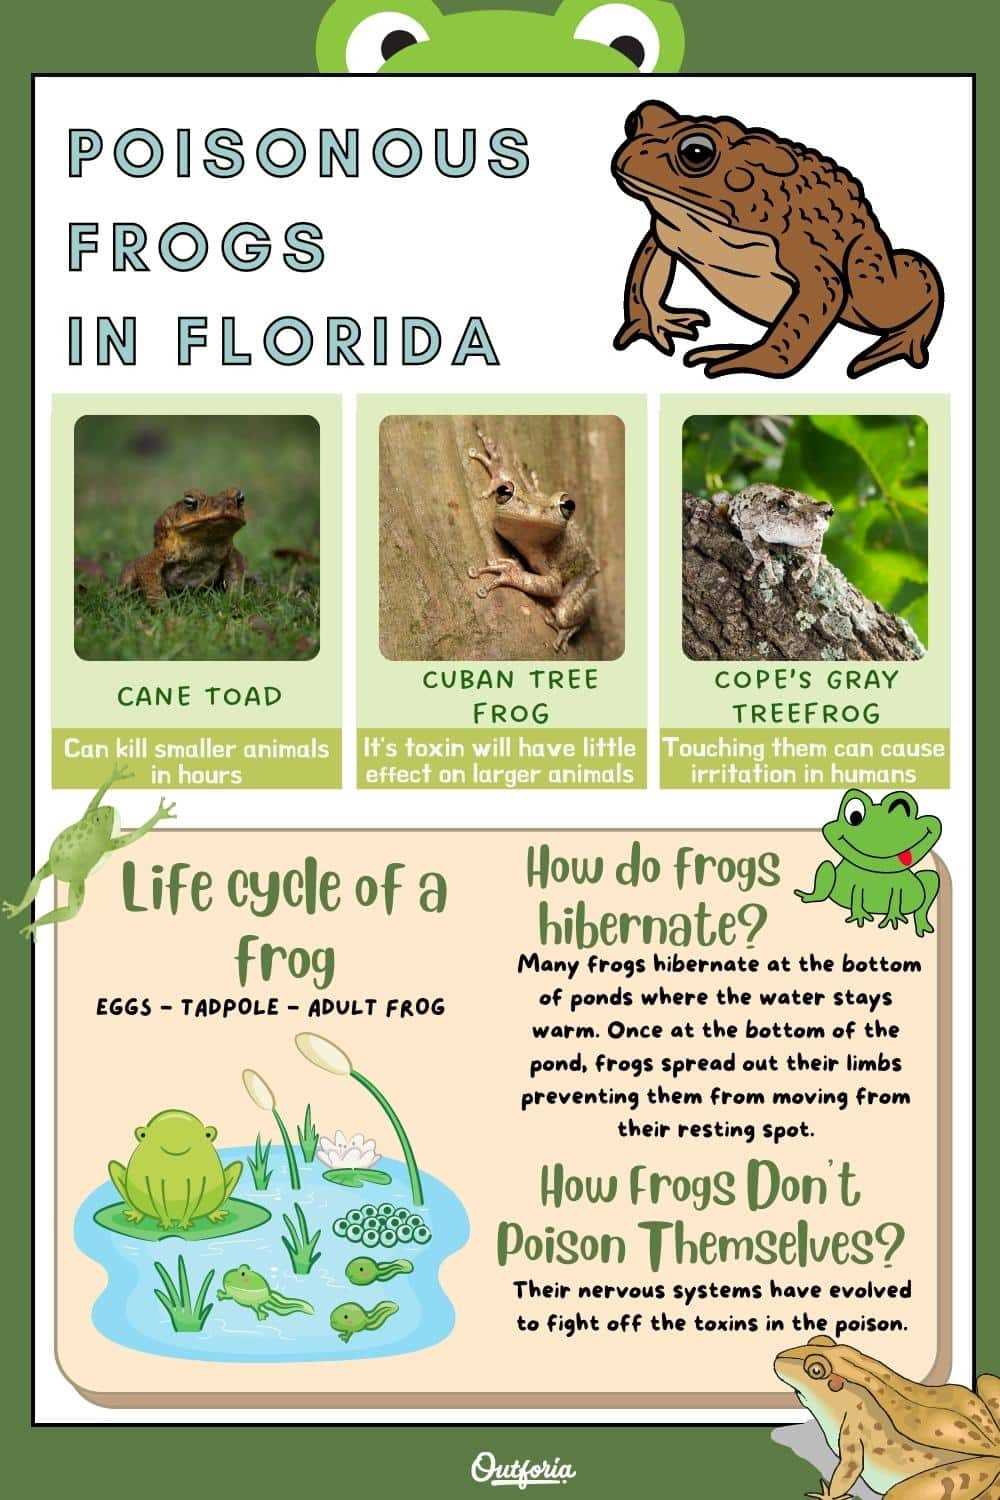 Are There Any Poisonous Frogs in Florida a Concern?